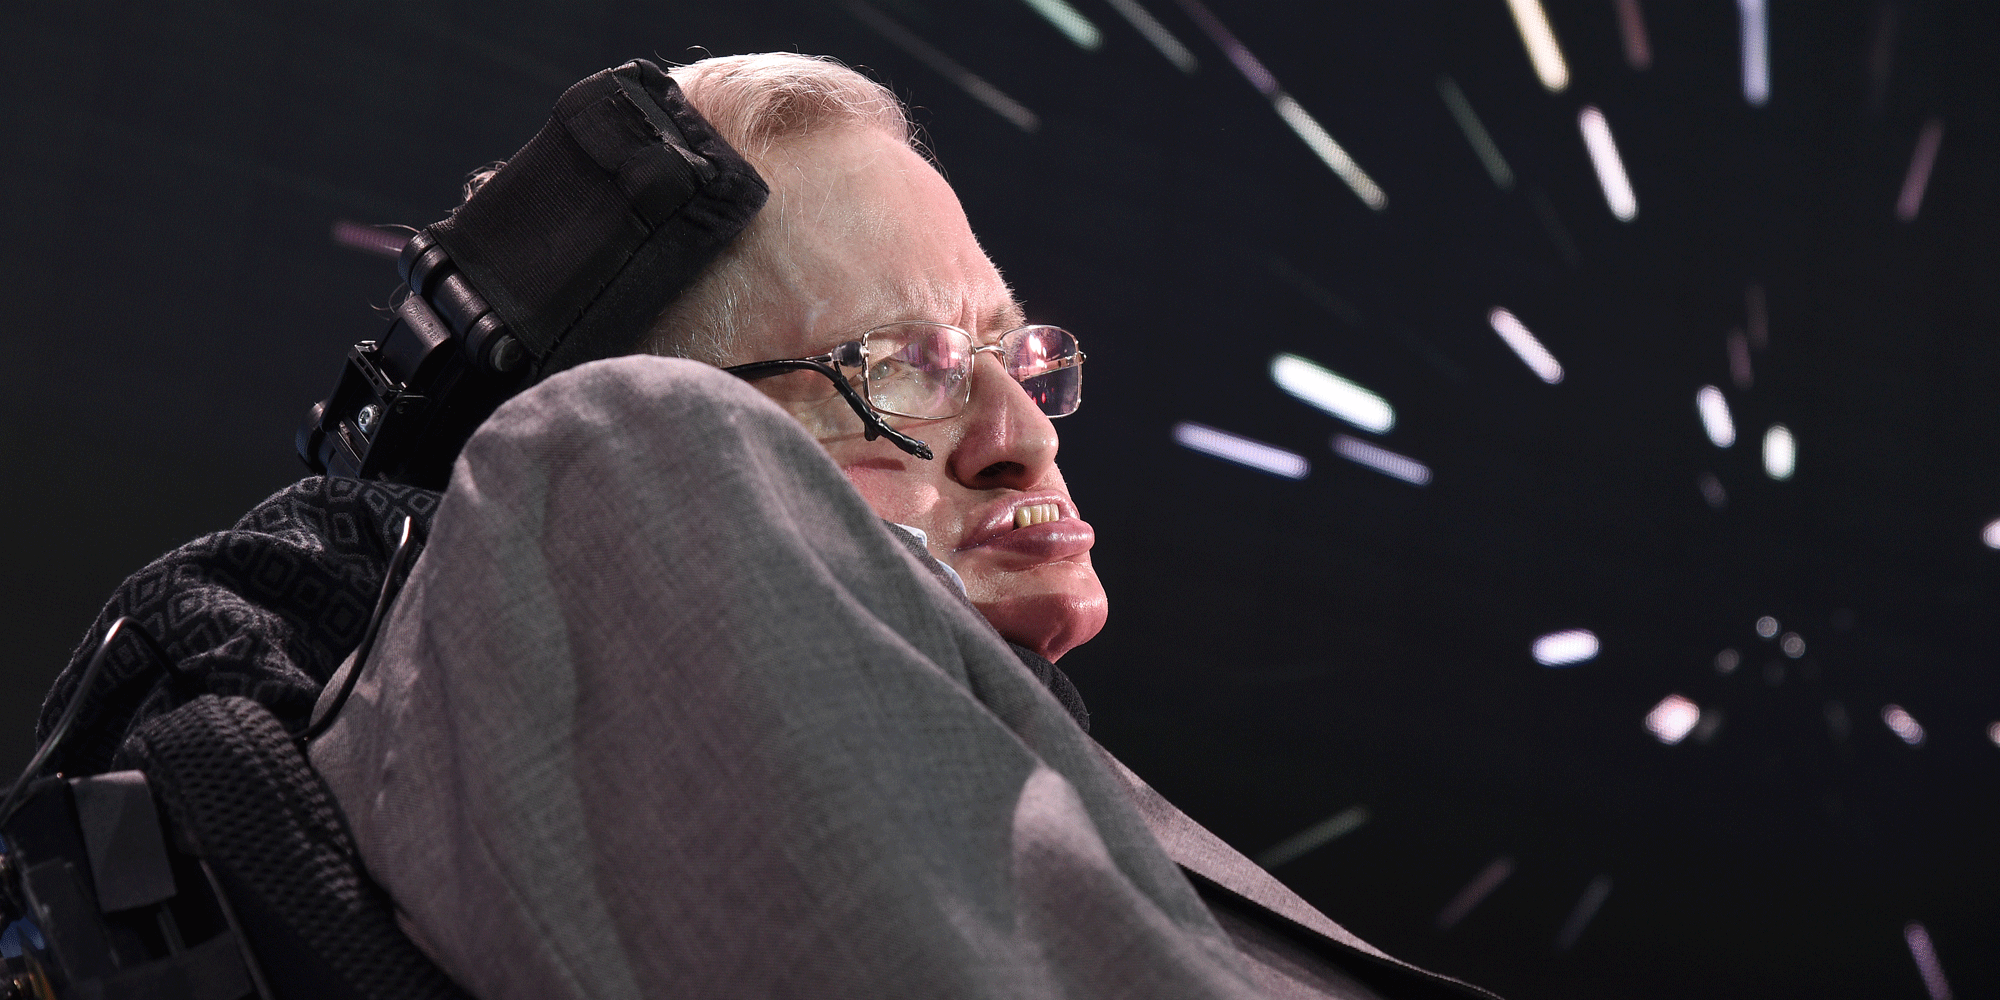 Stephen Hawking said 'people who boast about their IQ are losers'